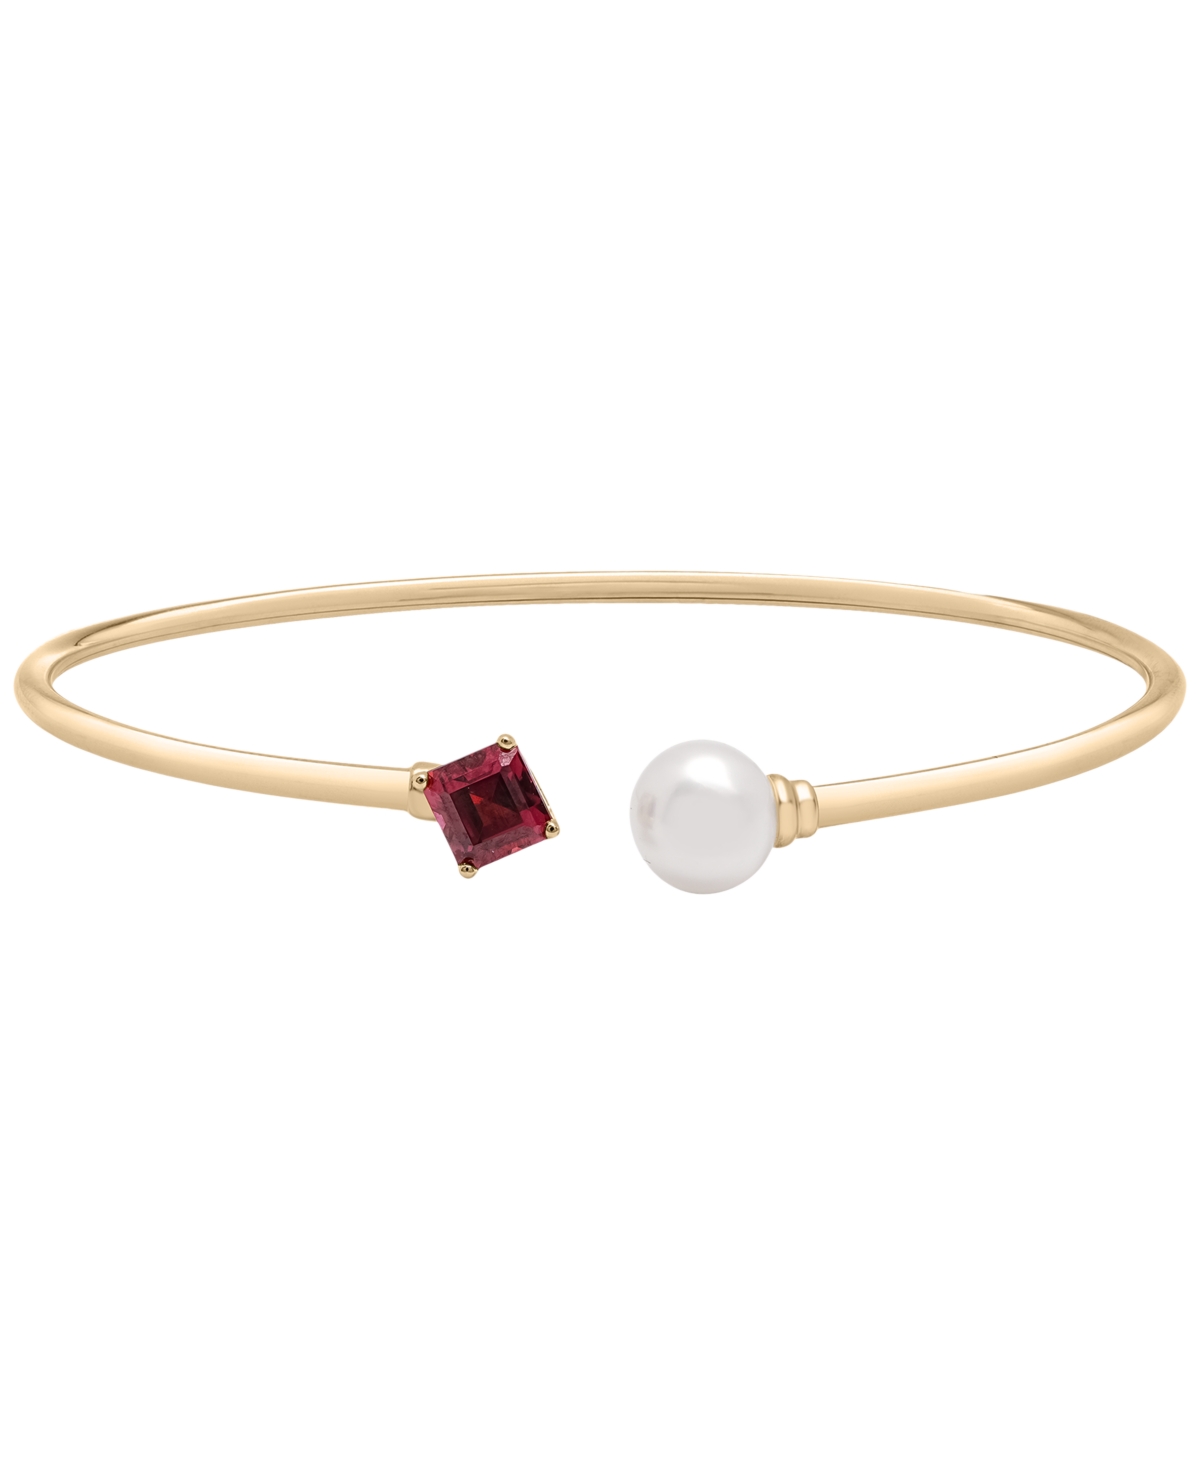 Cultured Freshwater Pearl (7mm) & Rhodolite (5/8 ct. t.w.) Wire Cuff Bangle Bracelet in Gold Vermeil, Created for Macy's - Gold Verme